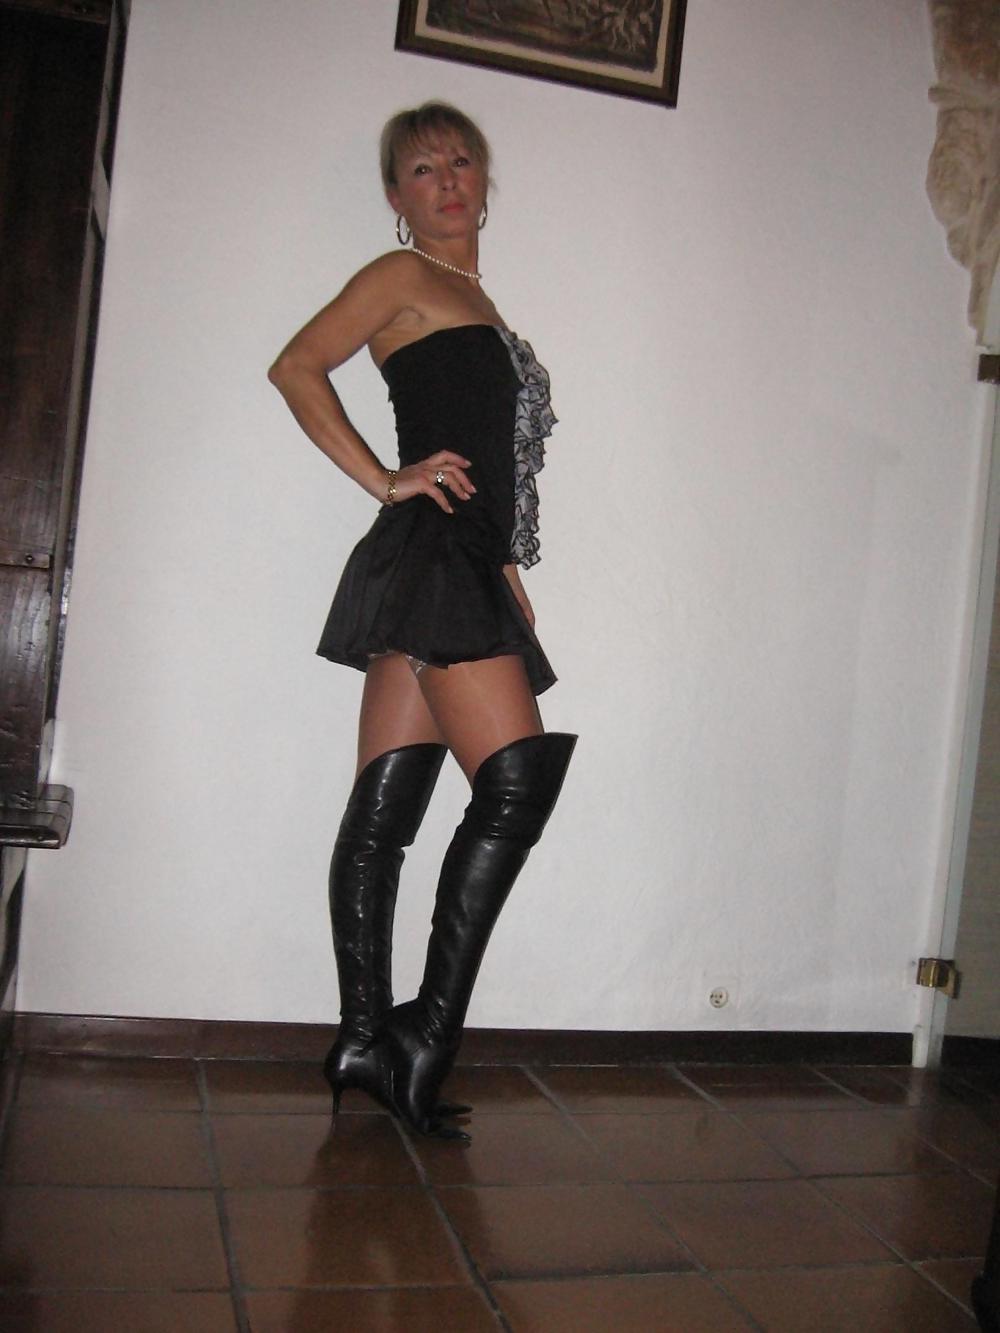 FANTASTIC MILF - SEXY AND HOT I #7007677